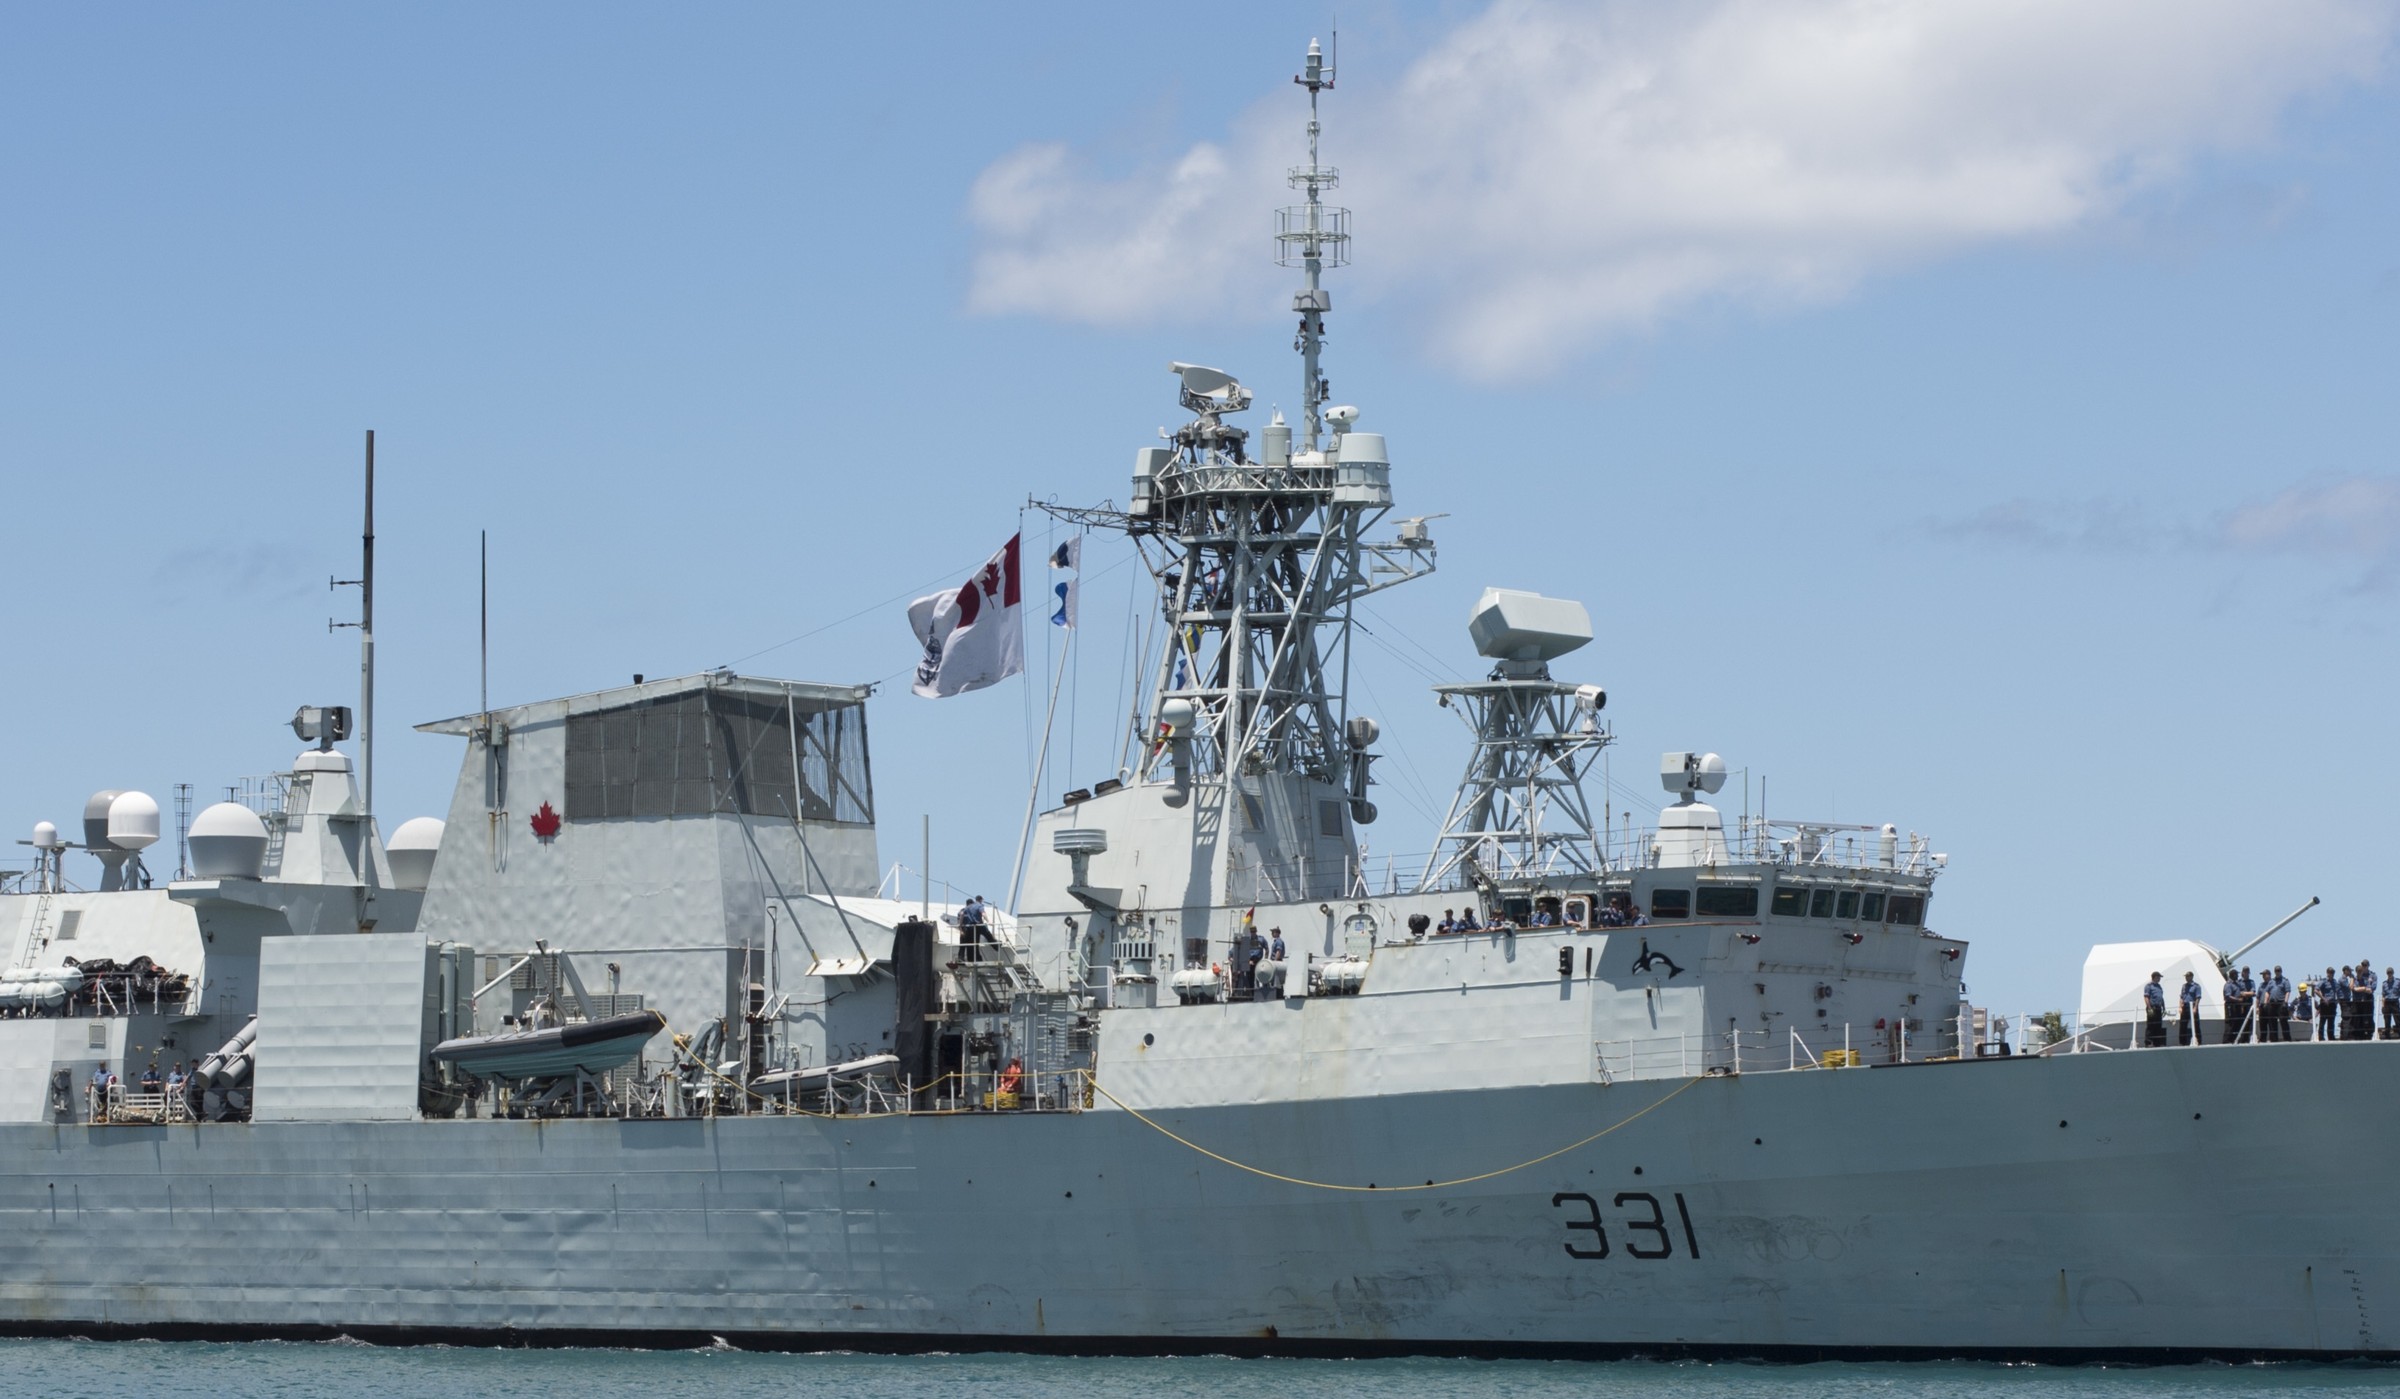 ffh-331 hmcs vancouver halifax class helicopter patrol frigate ncsm royal canadian navy 12